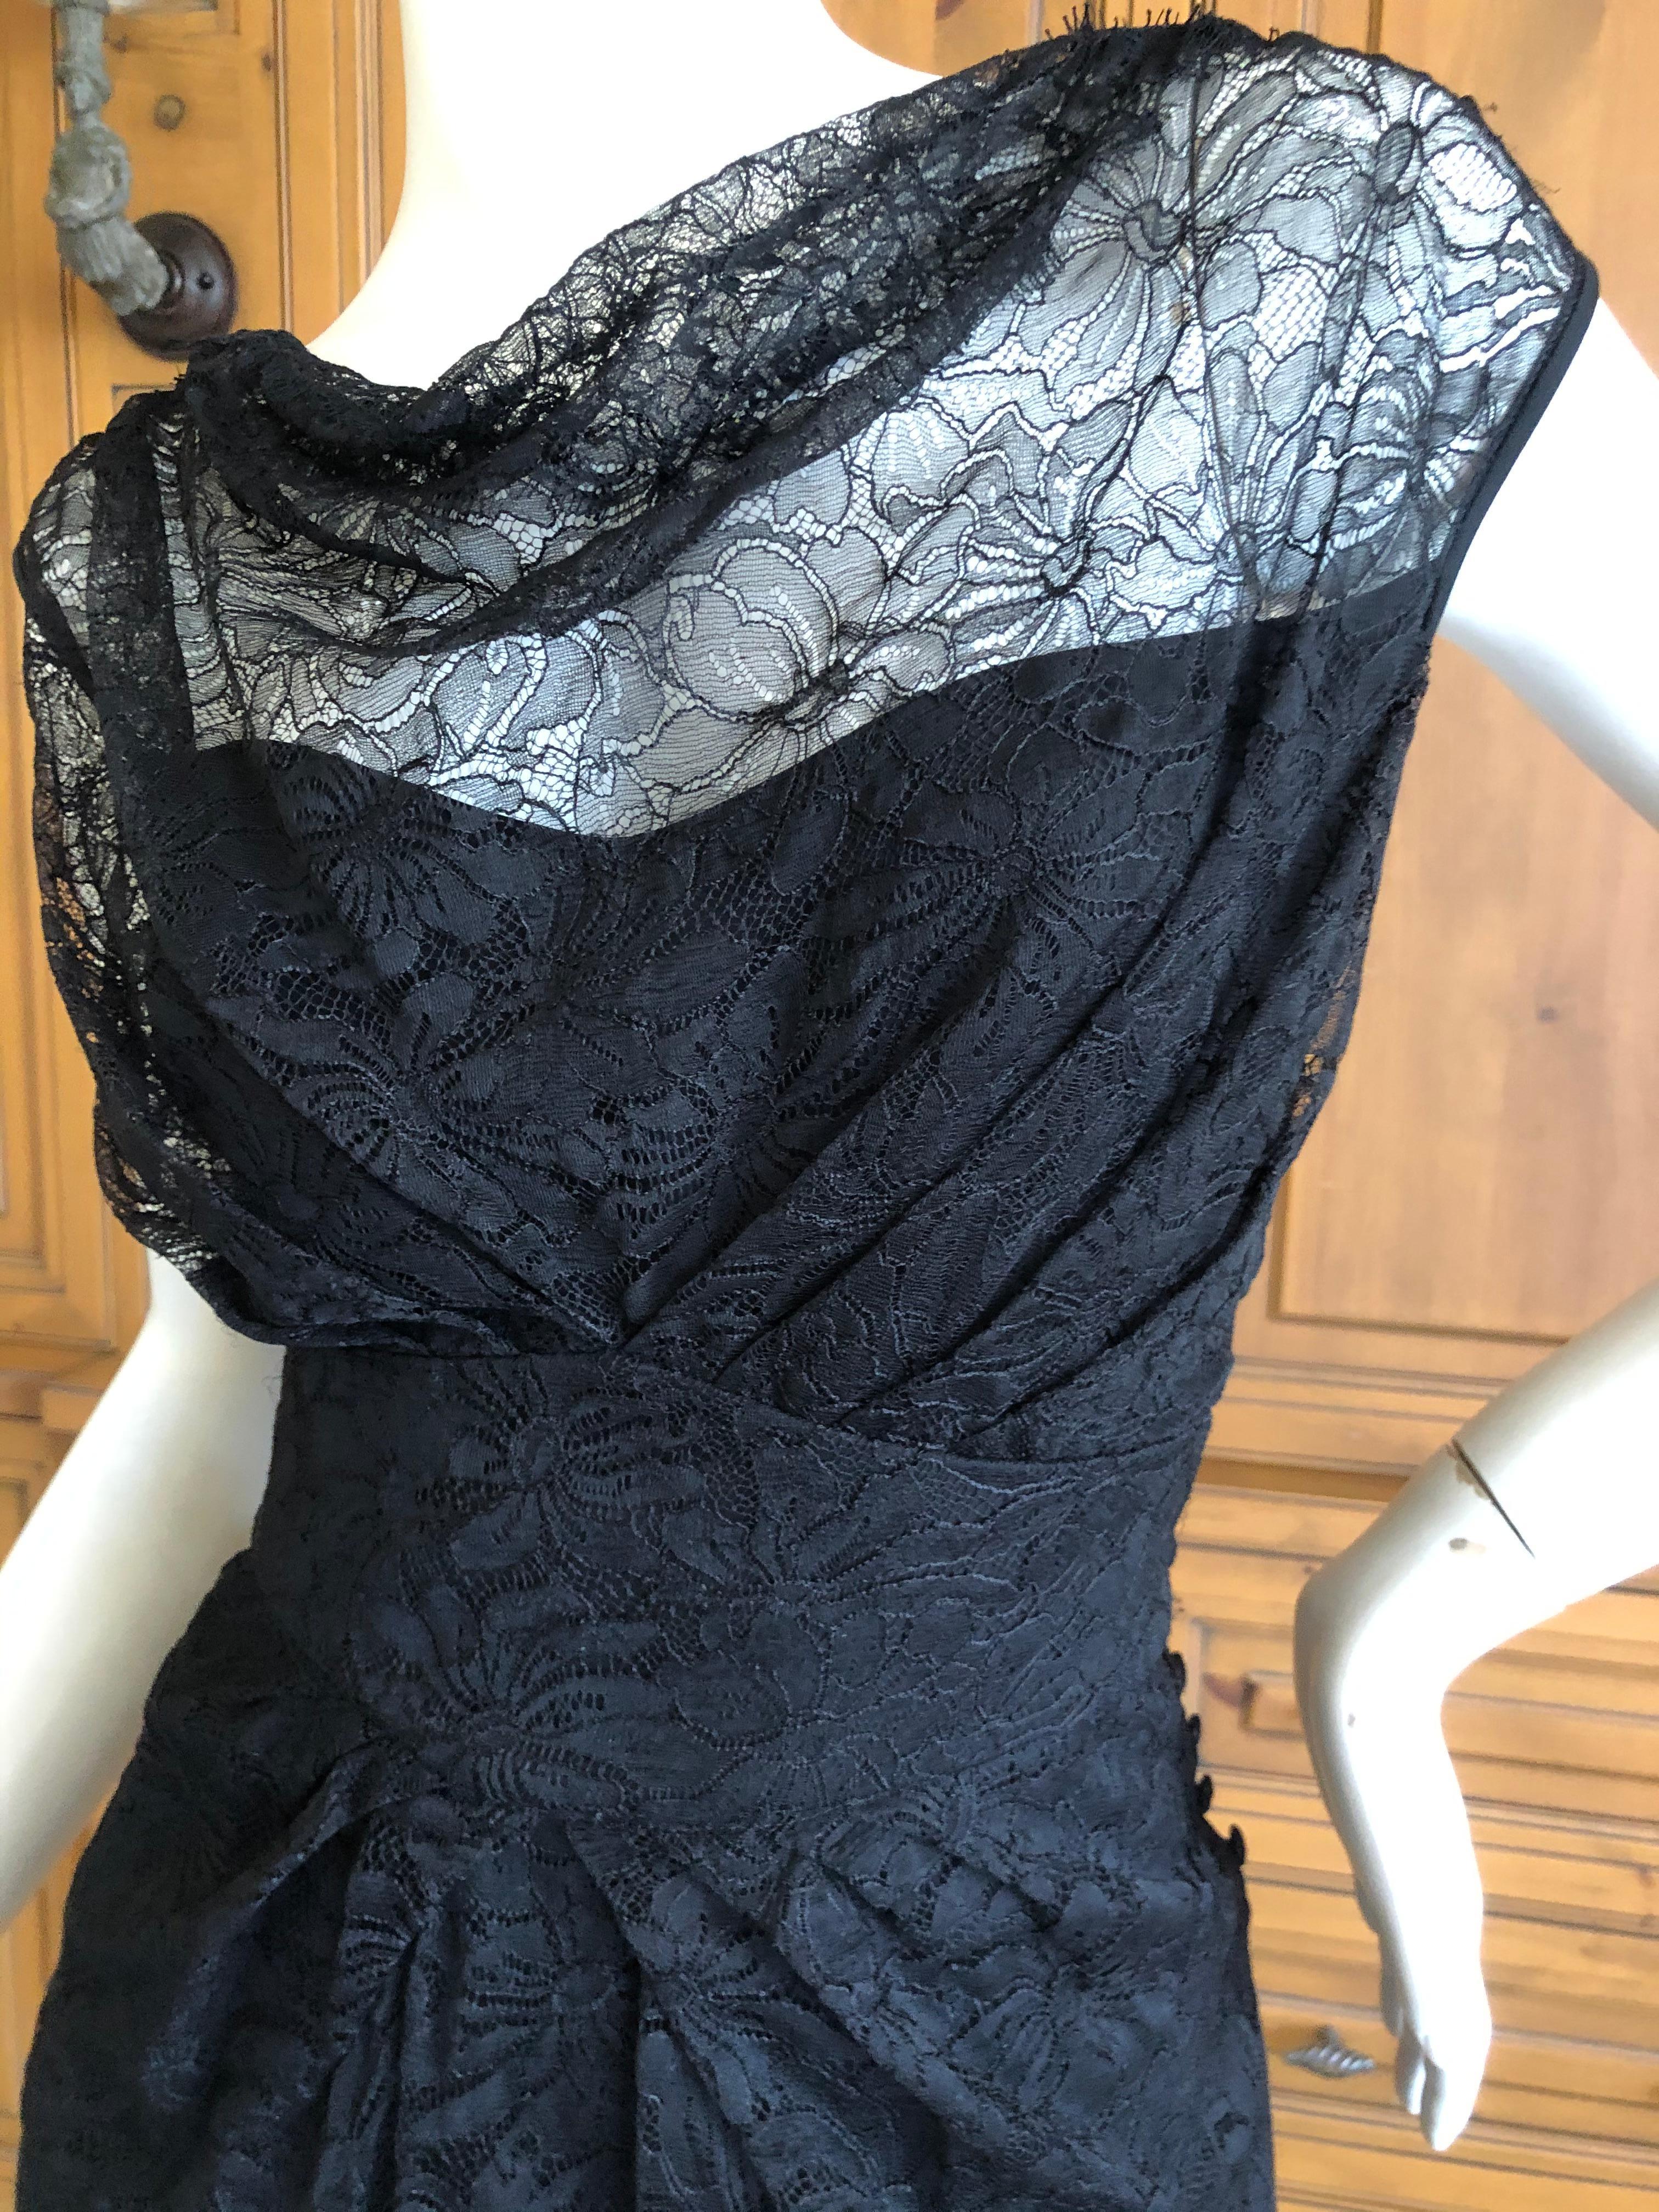 John Galliano Vintage Sleeveless Black Lace Evening Dress
This is so pretty but difficult to photograph the black details.
The lace is so pretty, I also show it raised on the skirt.
 Size 40
 Bust 40